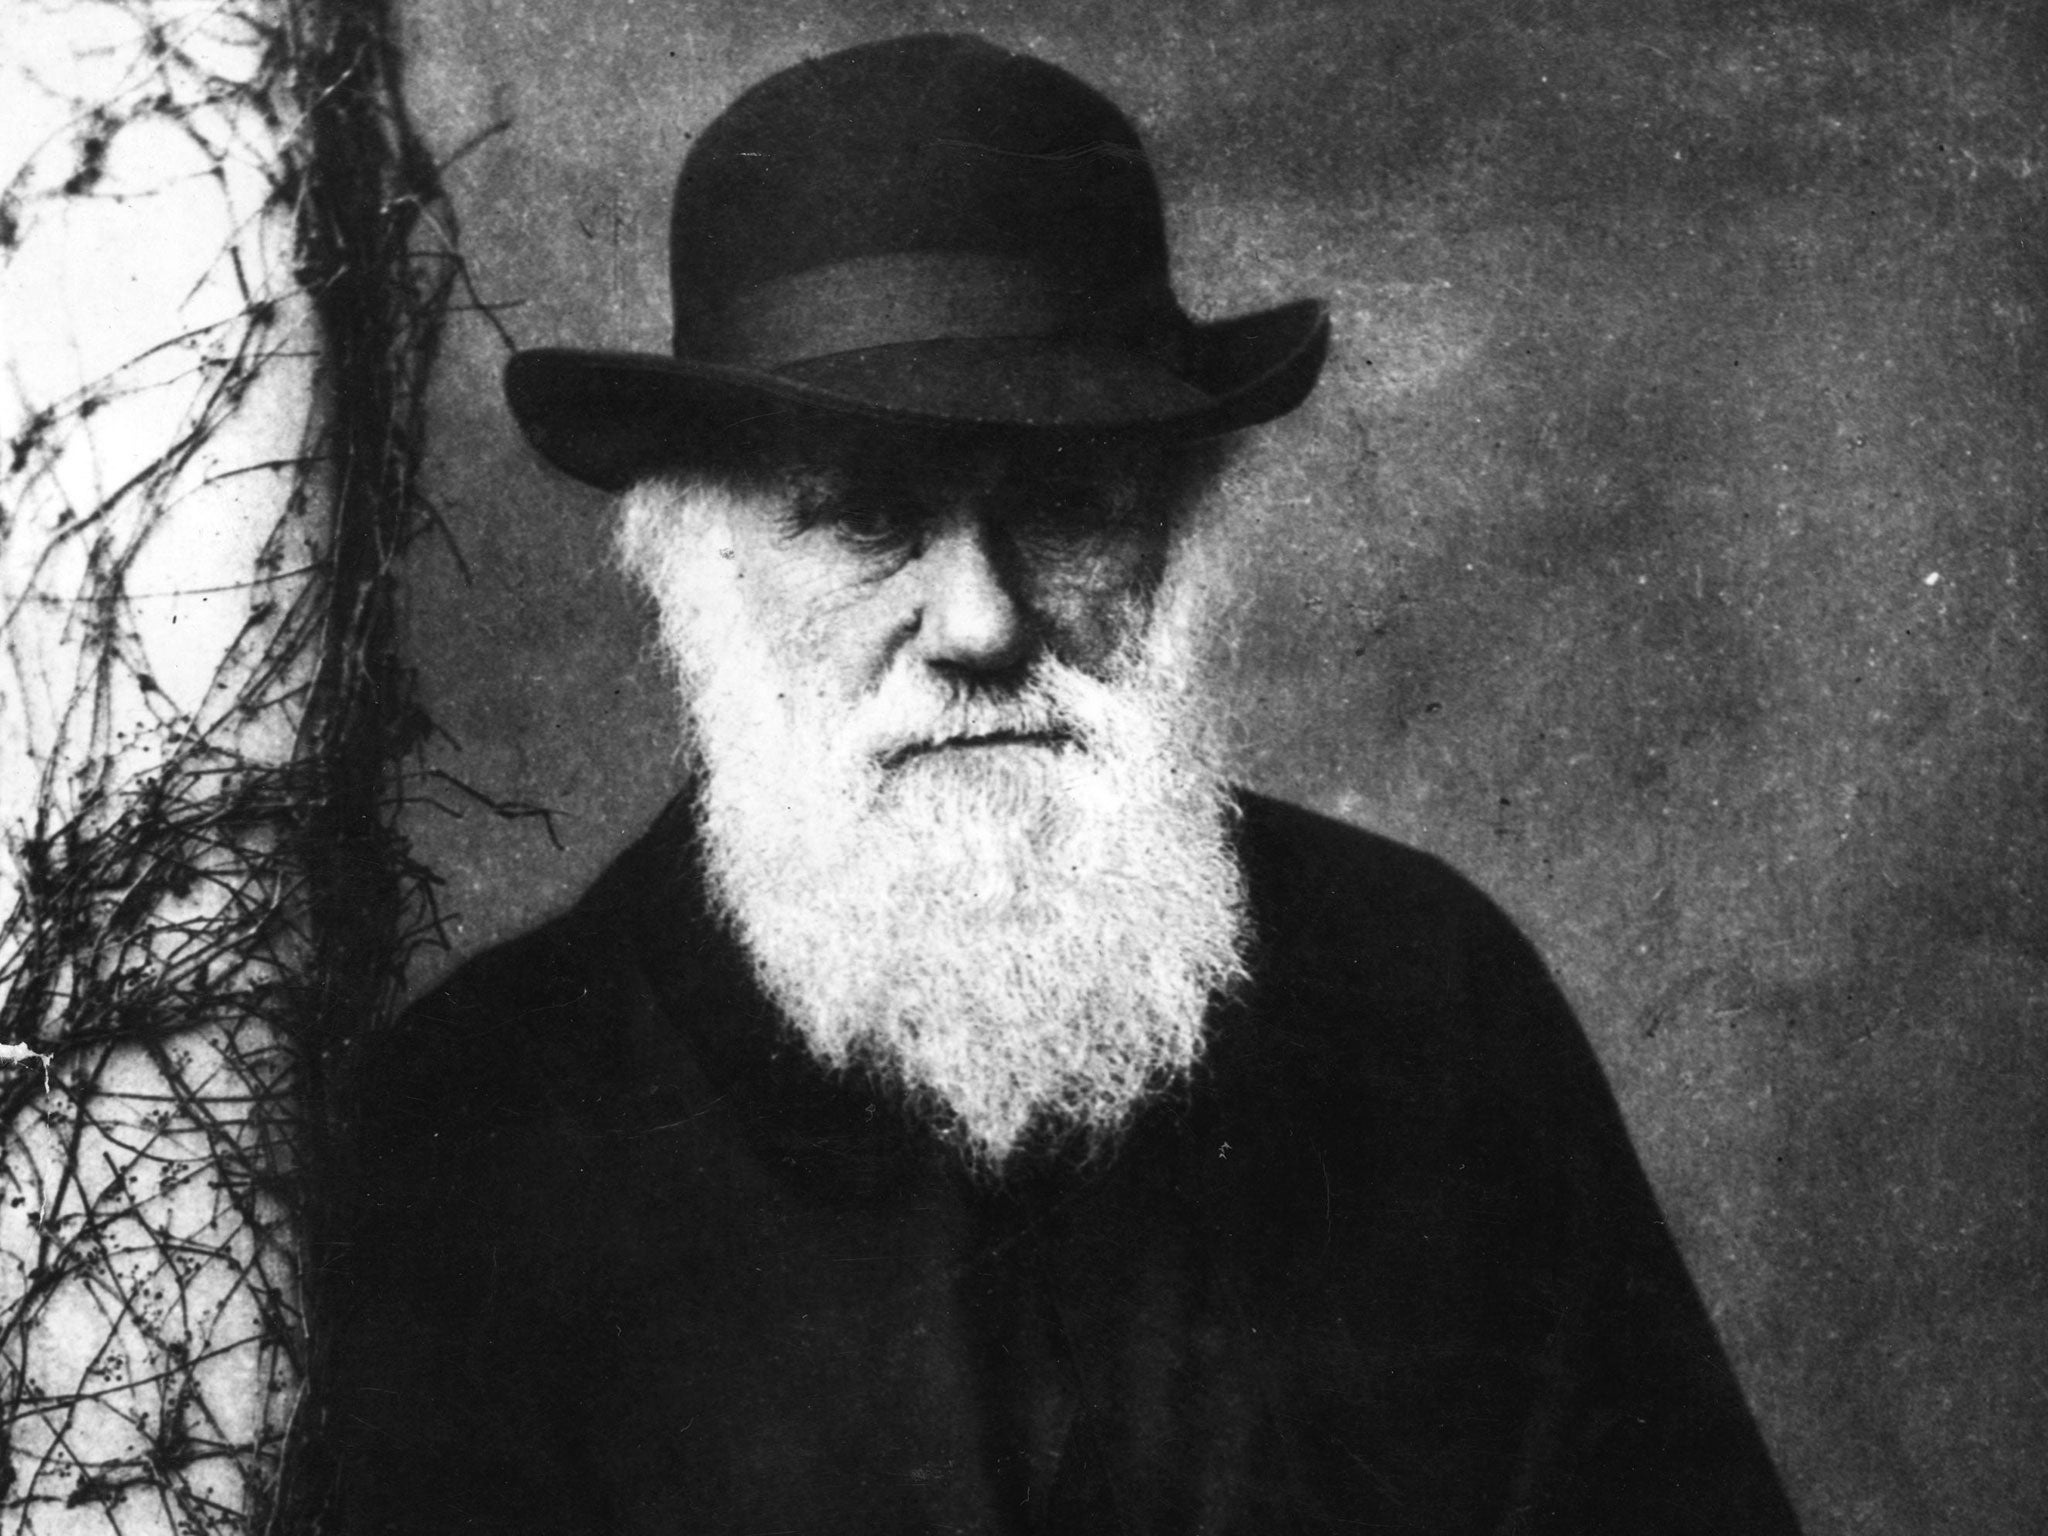 Charles Darwin, who founded the principles of evolutionary theory after an expedition to the Galapagos Islands